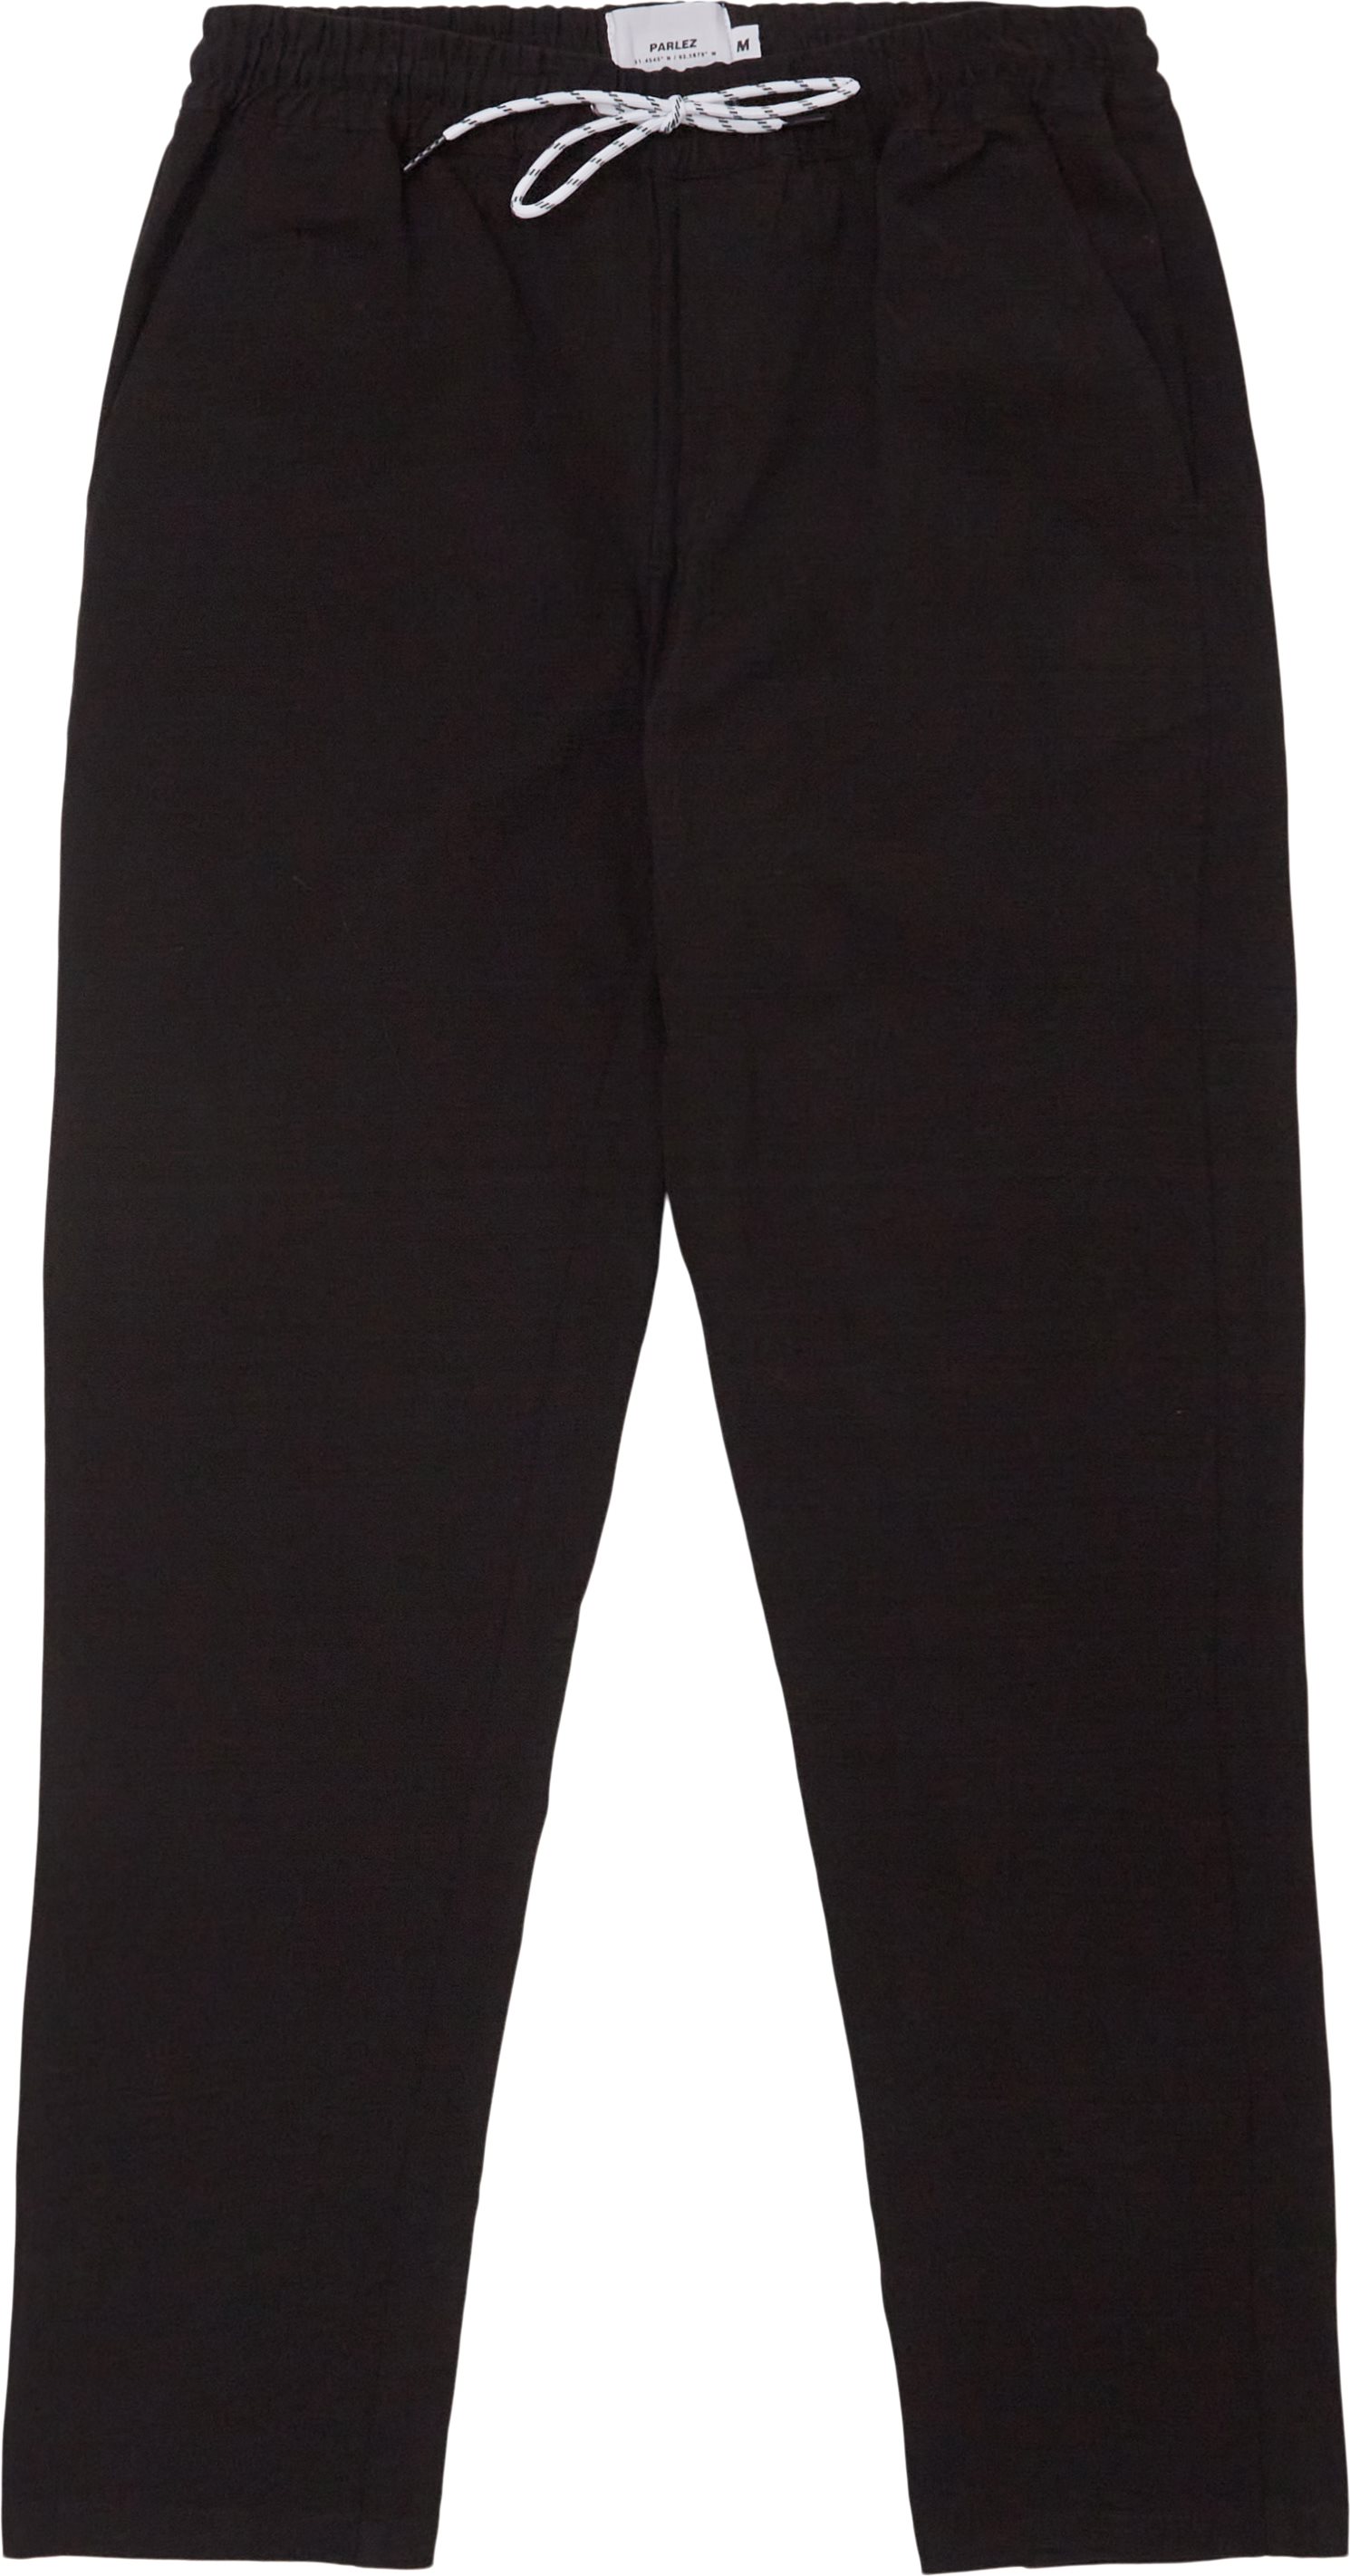 PARLEZ Trousers SPRING TROUSERS Black